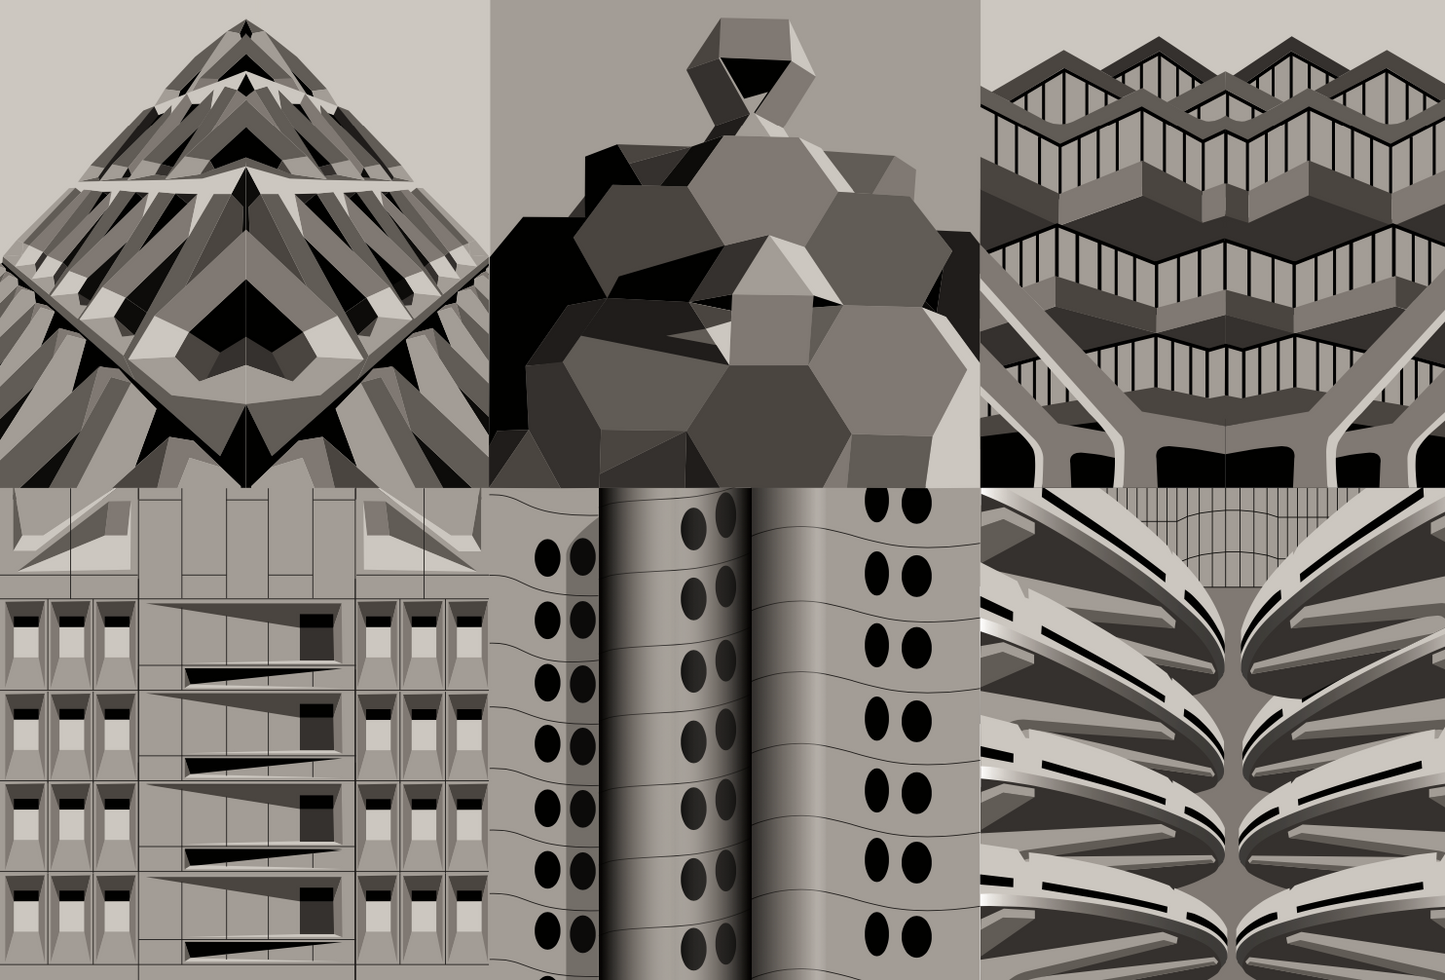 Façades of Brutalism mini puzzle  beamalevich architecture gift design gift art gift